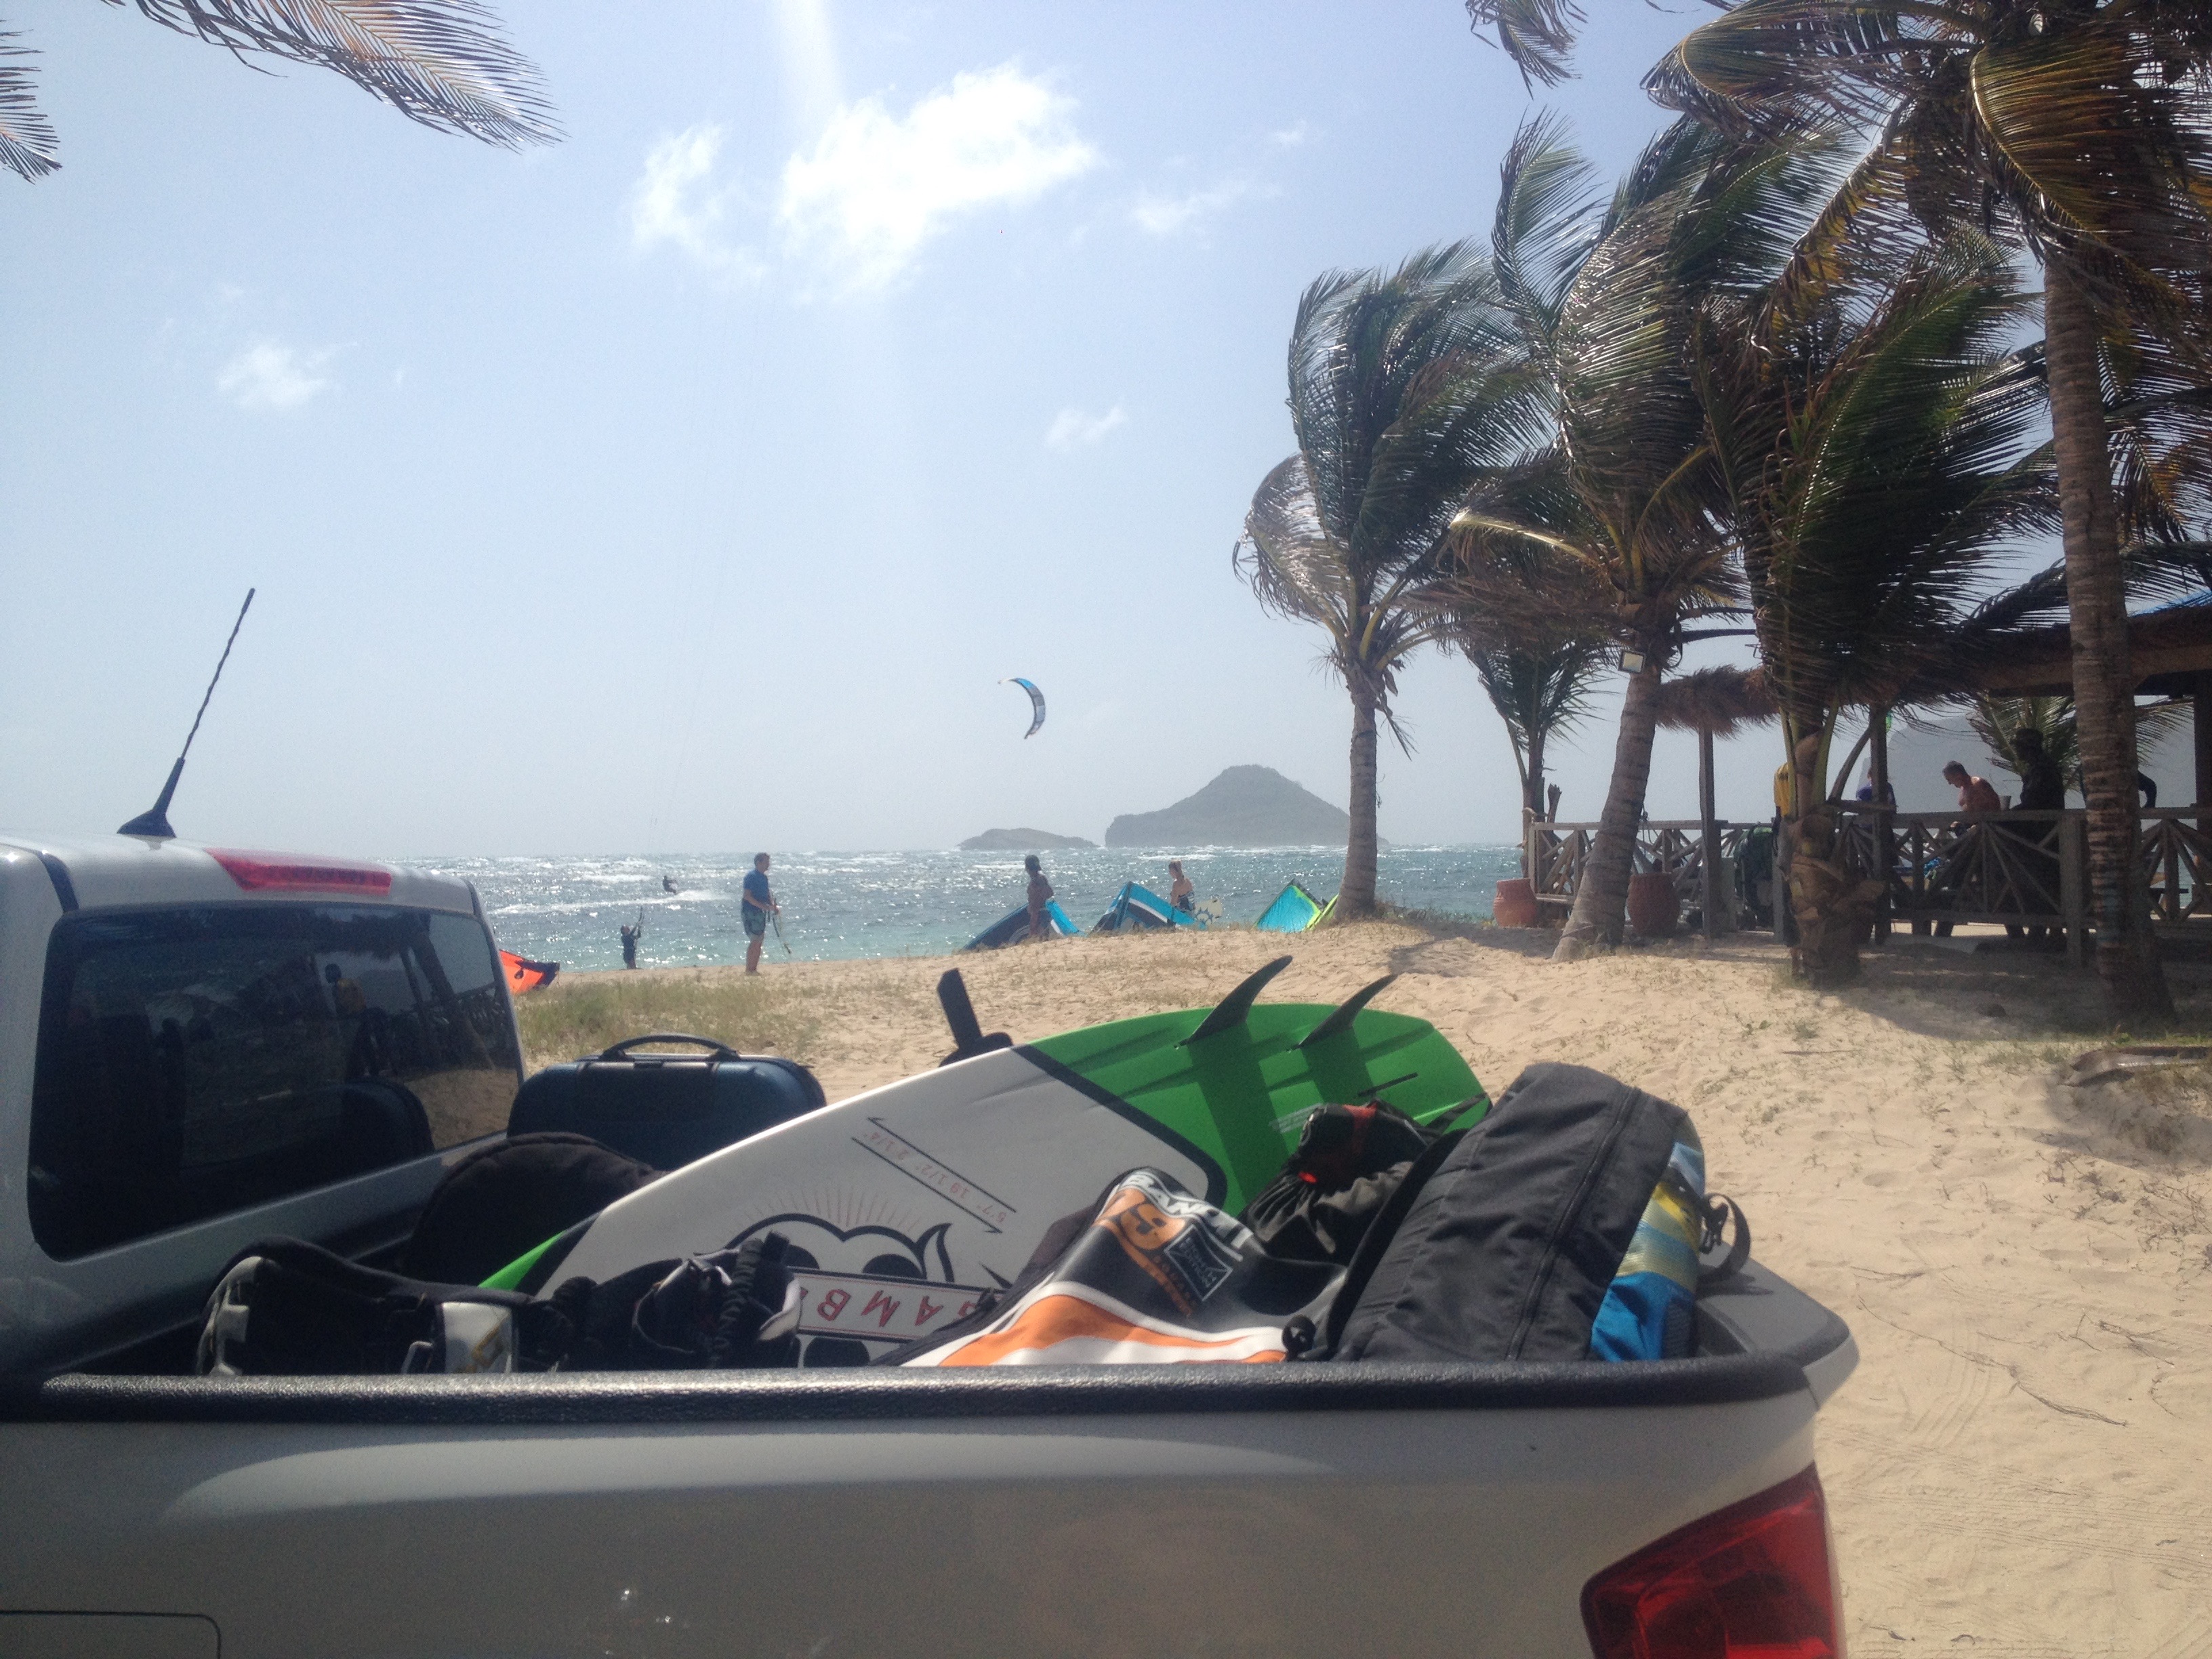 A pickup full of kite gear at Coconut Bay, St Lucia